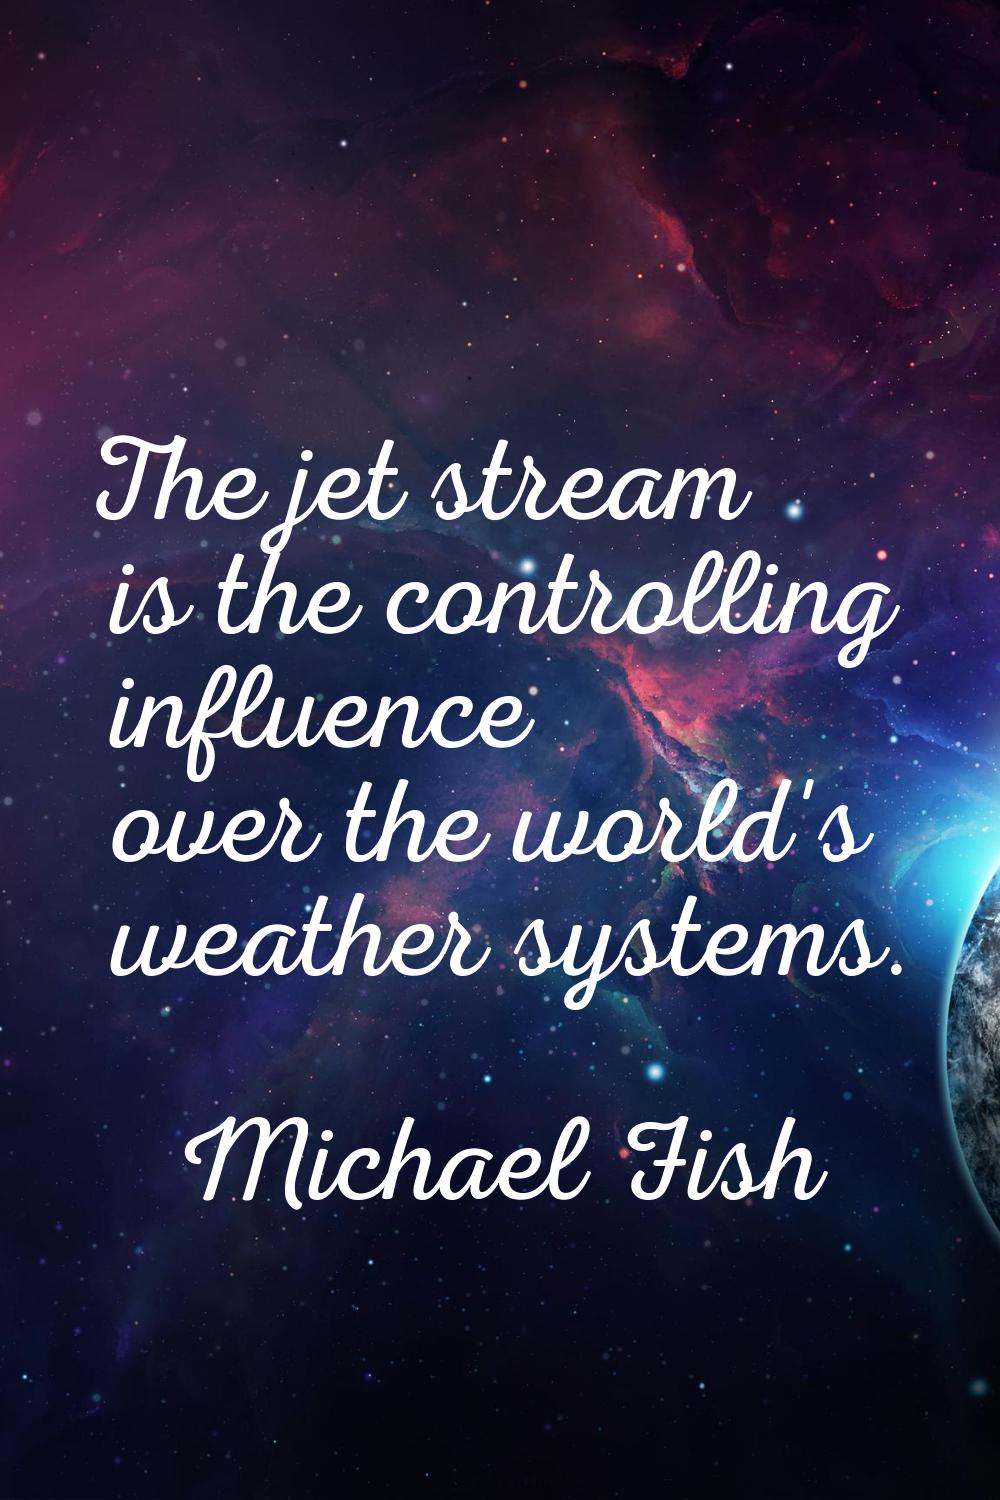 The jet stream is the controlling influence over the world's weather systems.